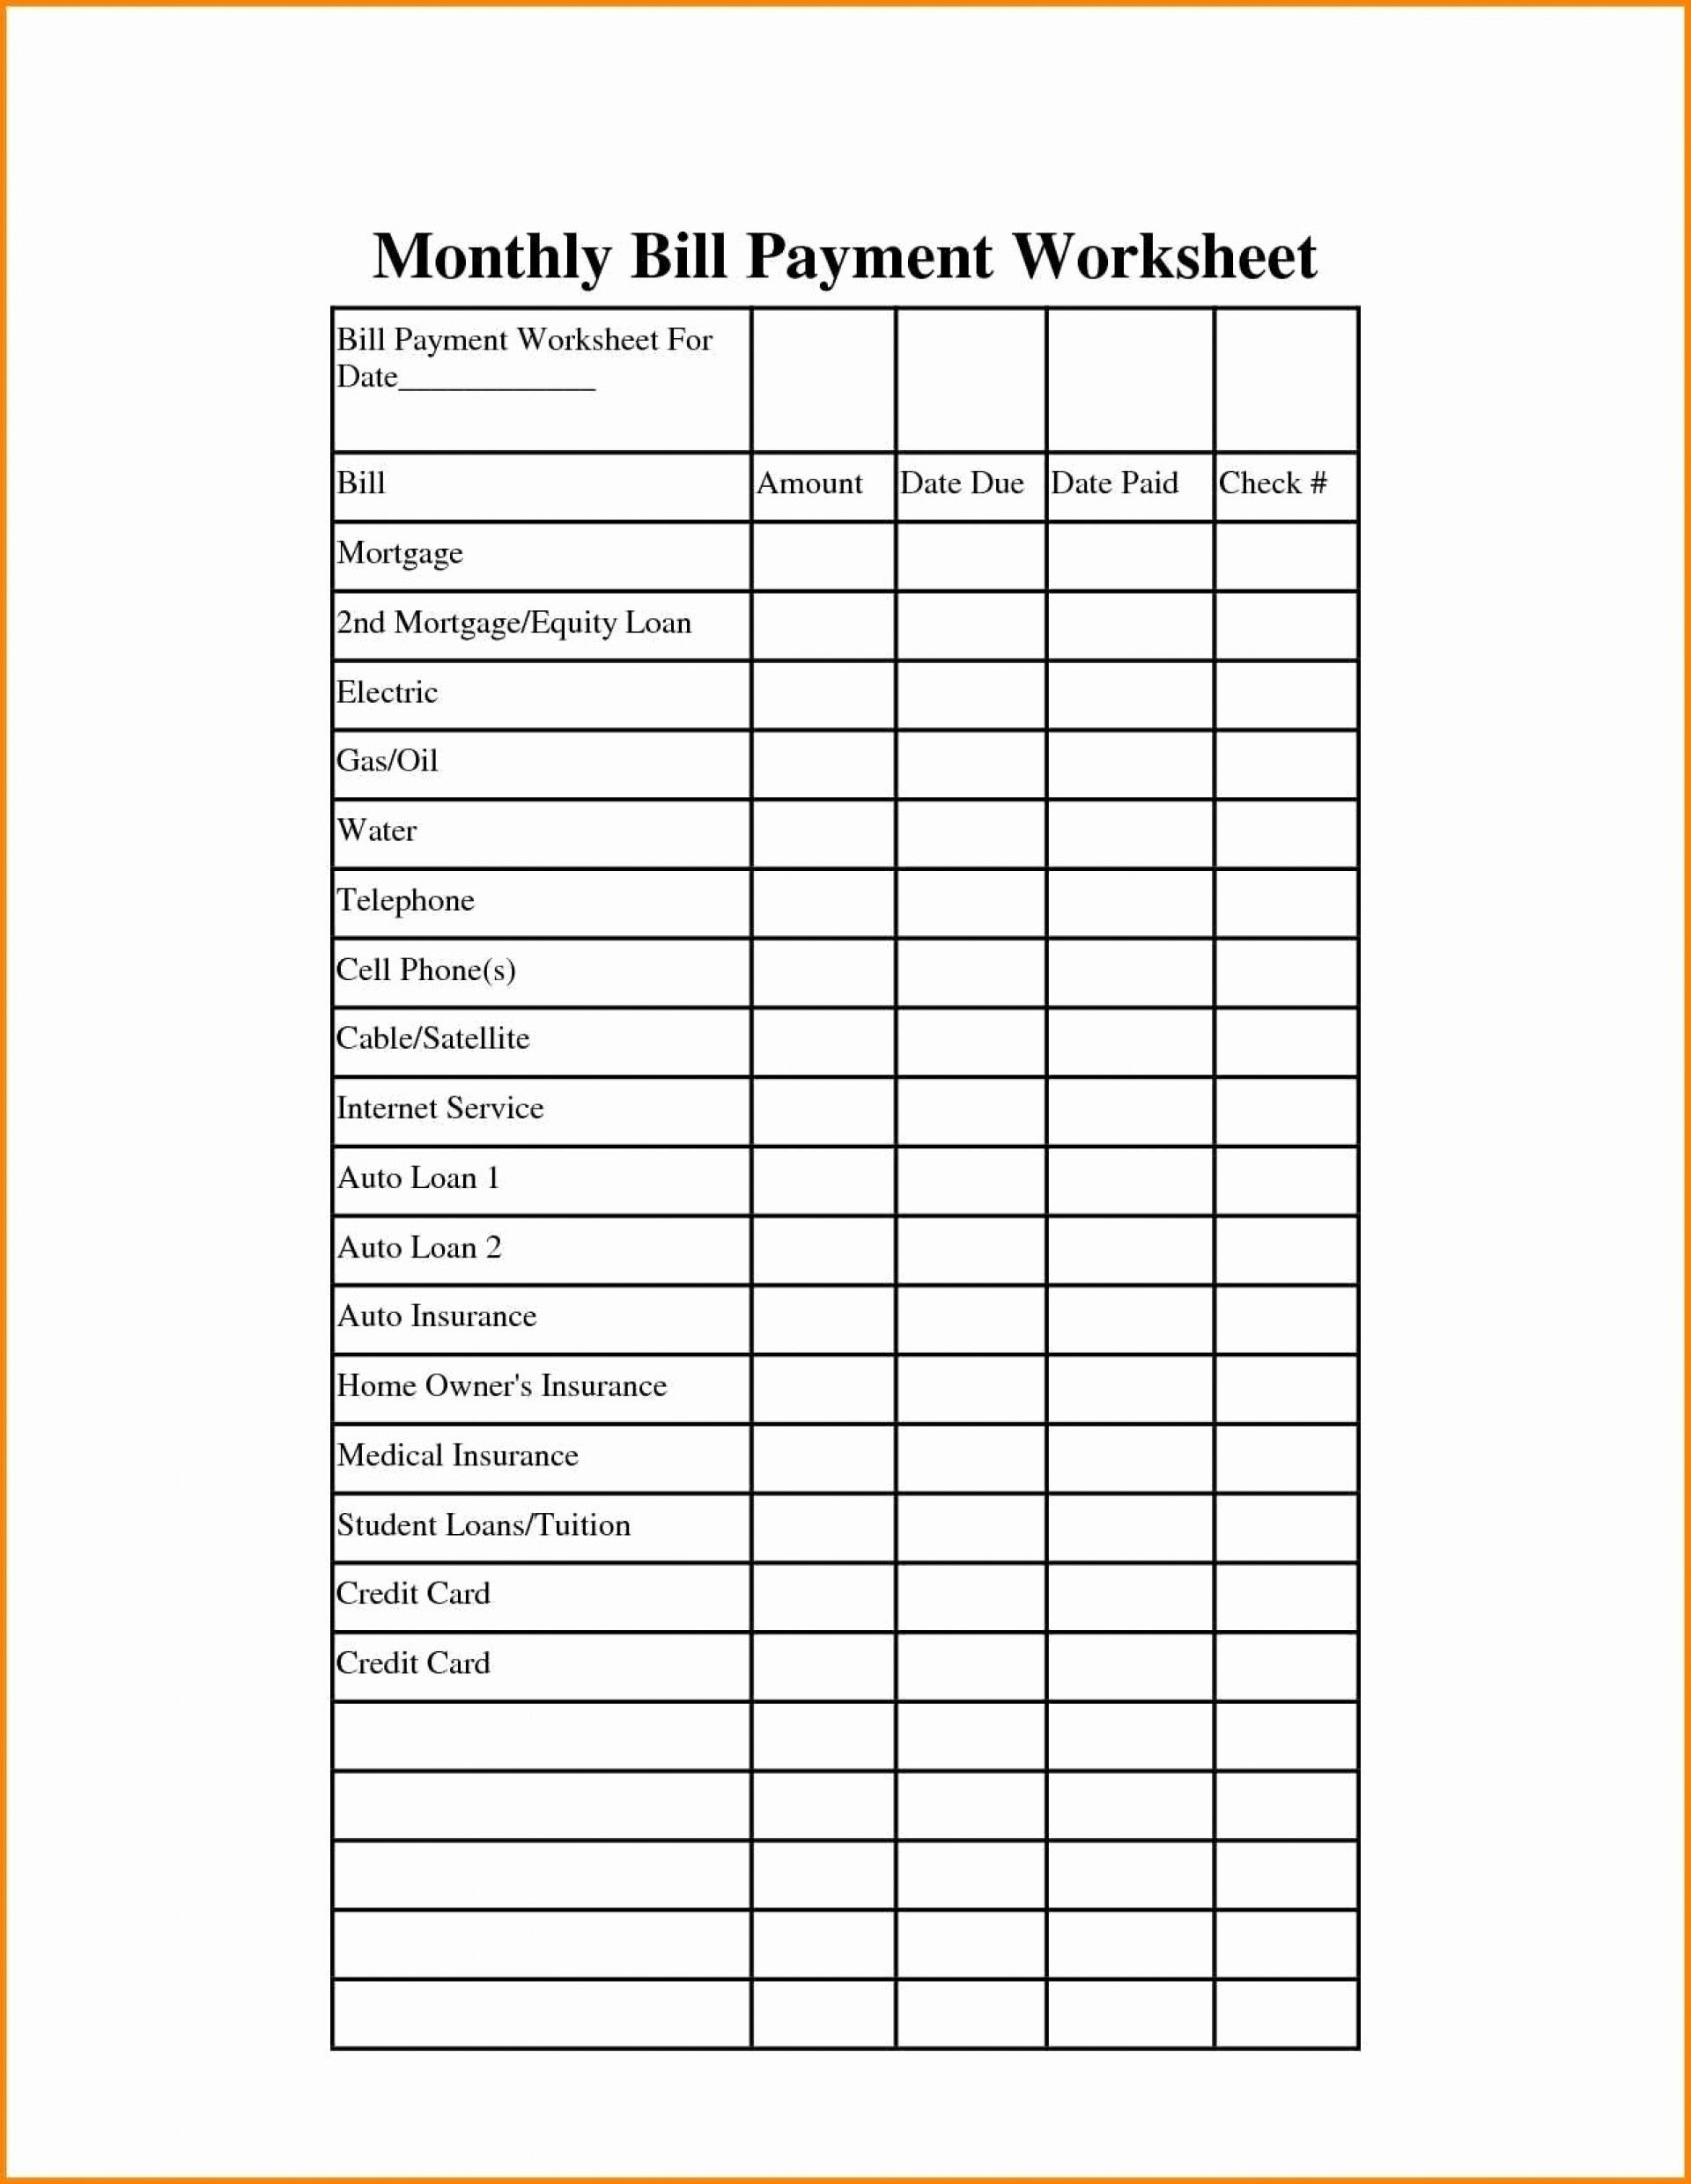 Monthly Bill Budget Spreadsheet Payment Worksheet Bills with Monthly Bill Payment Worksheet